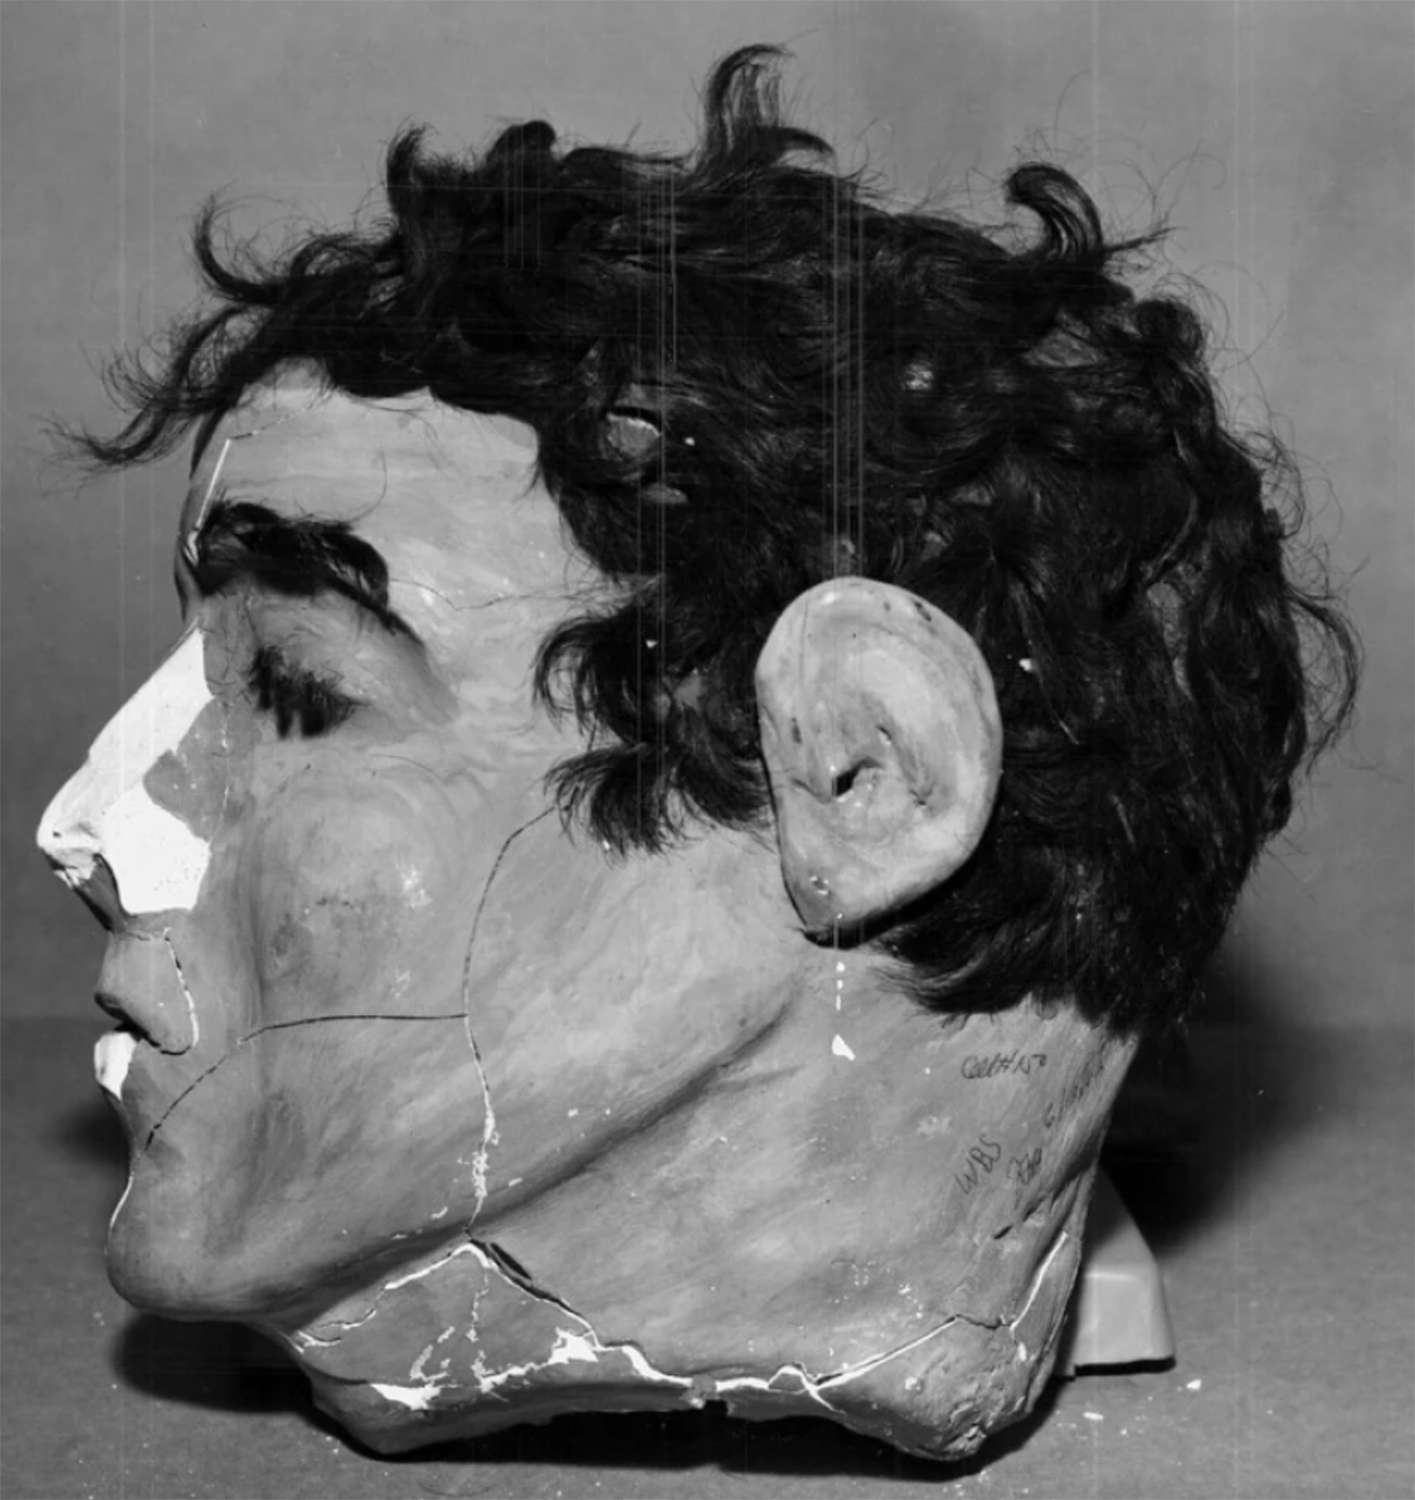 Profile of the dummy head found in Morris’ cell. The broken nose happened when the head rolled off the bed and hit the floor after a guard reached through the bars and pushed it, 미국에 따르면. Marshal’s website.